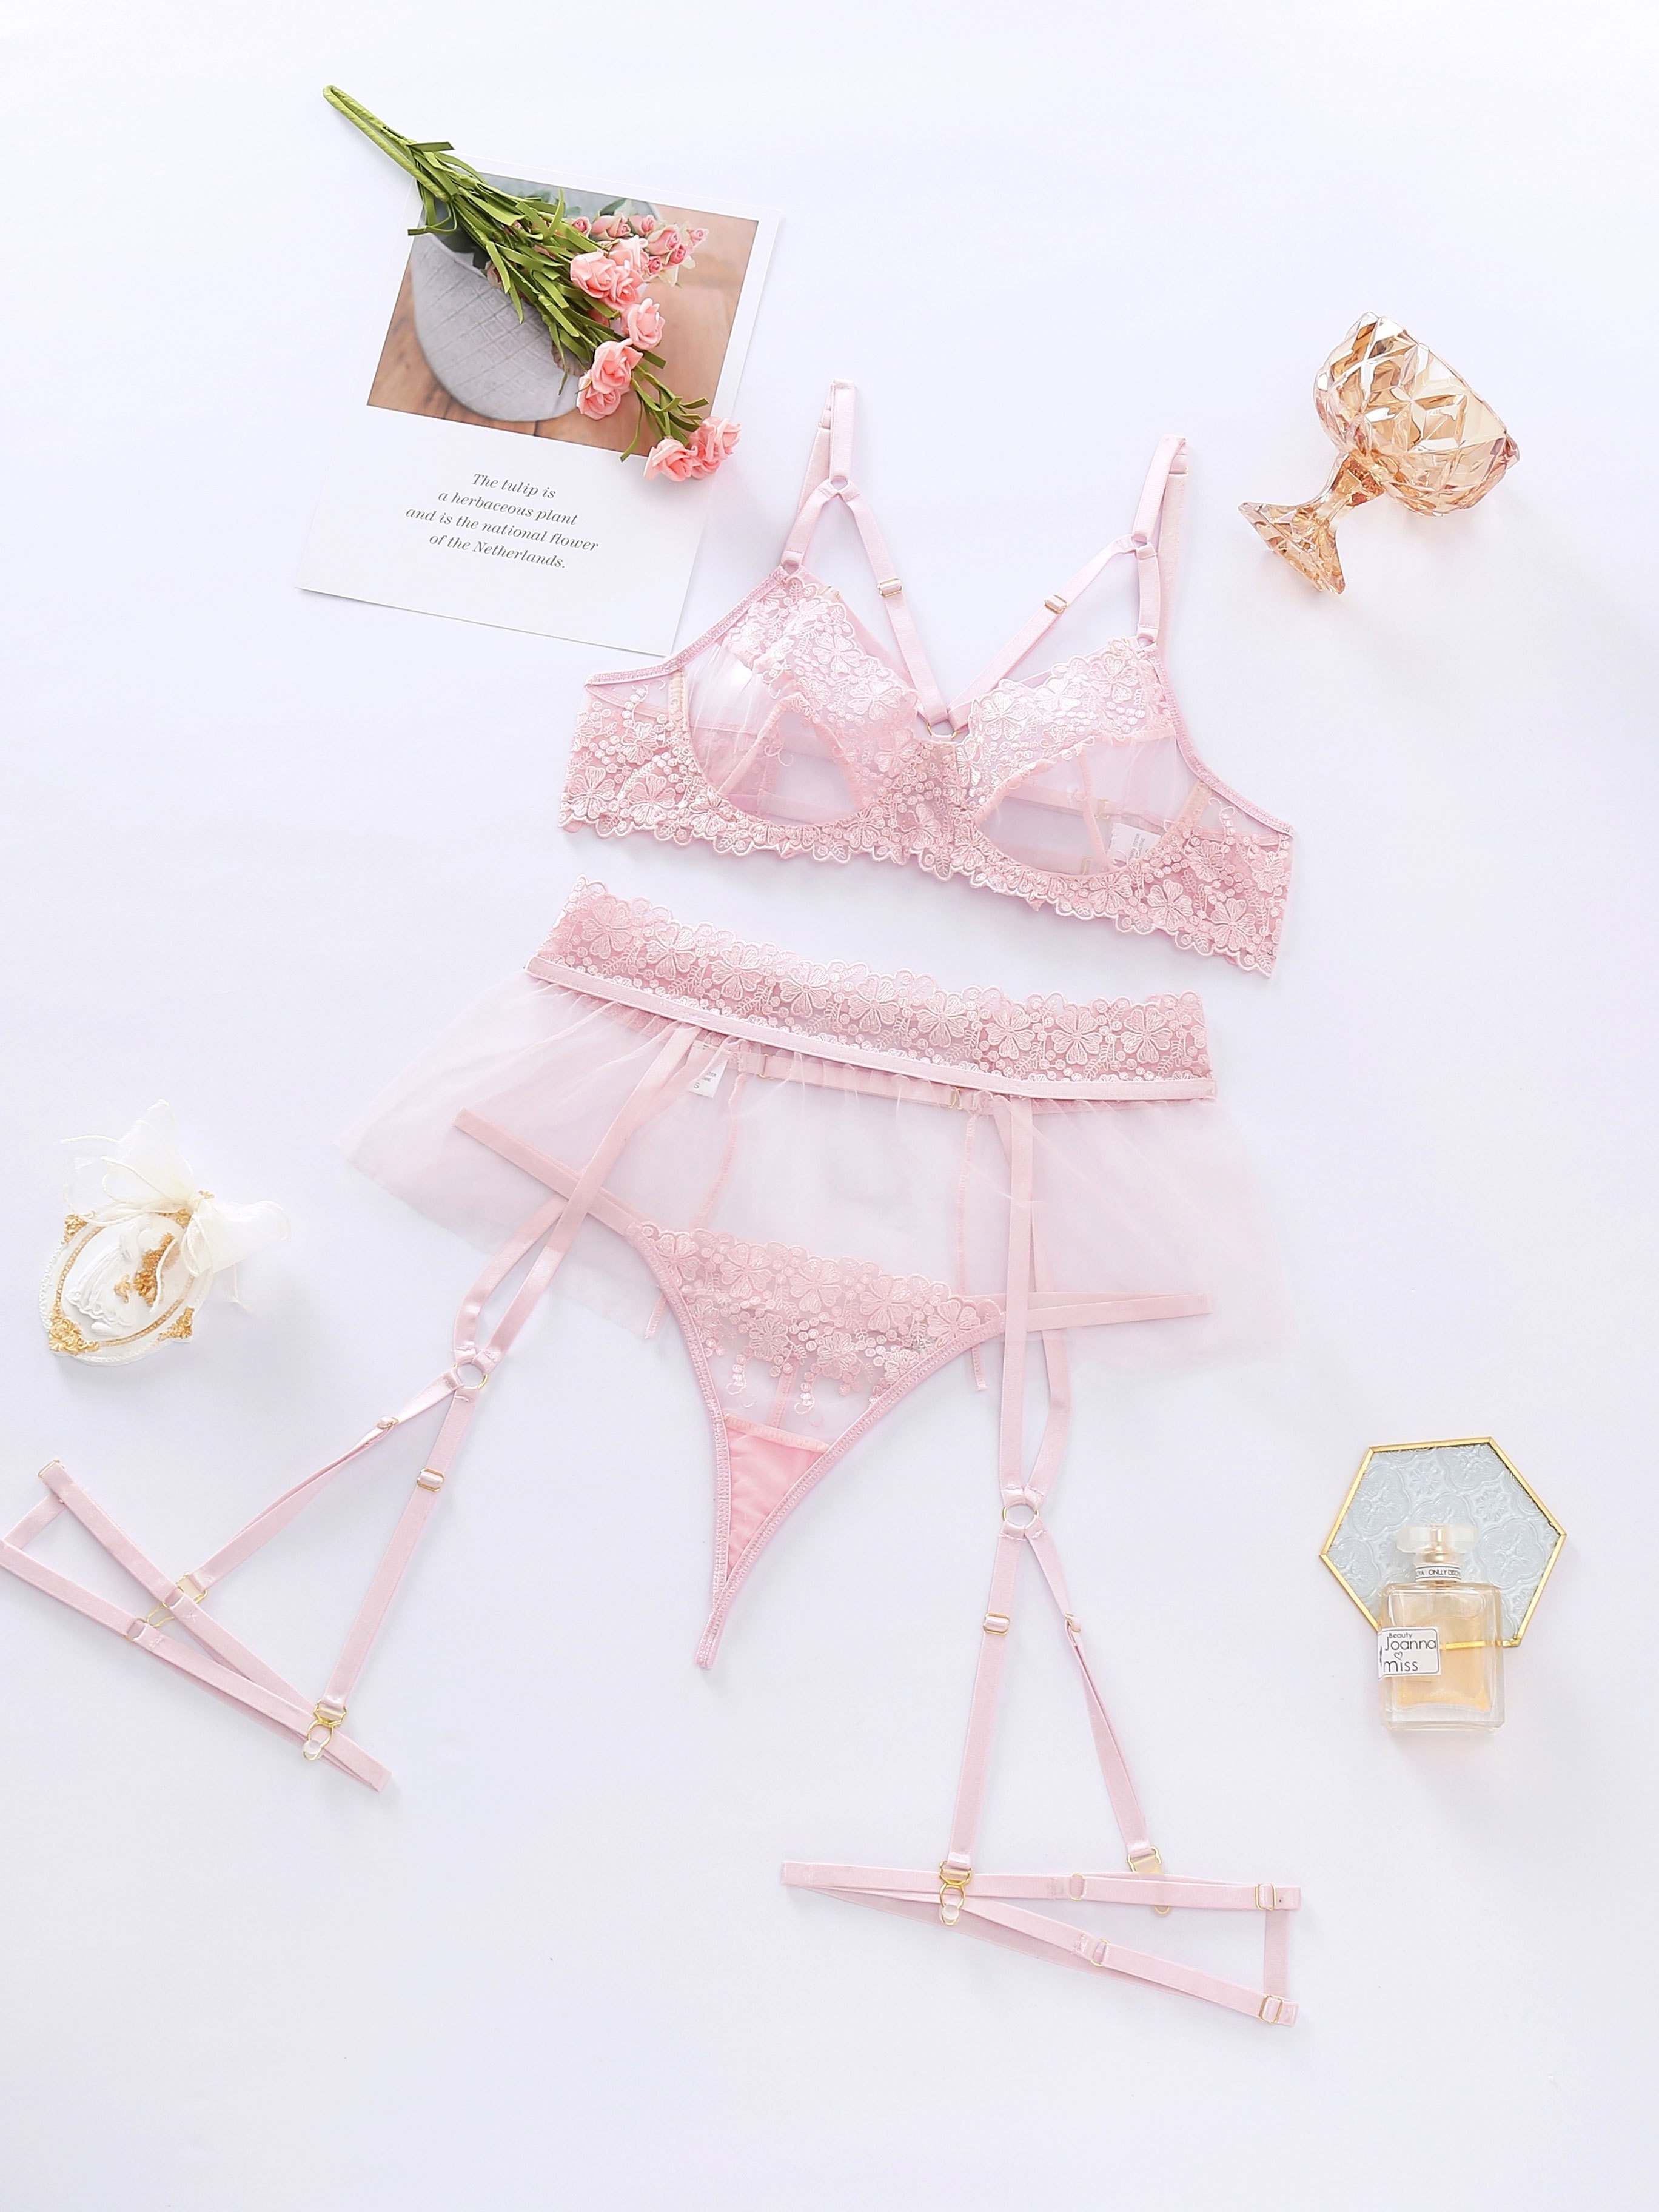 How to choose the right lingerie for different occasions